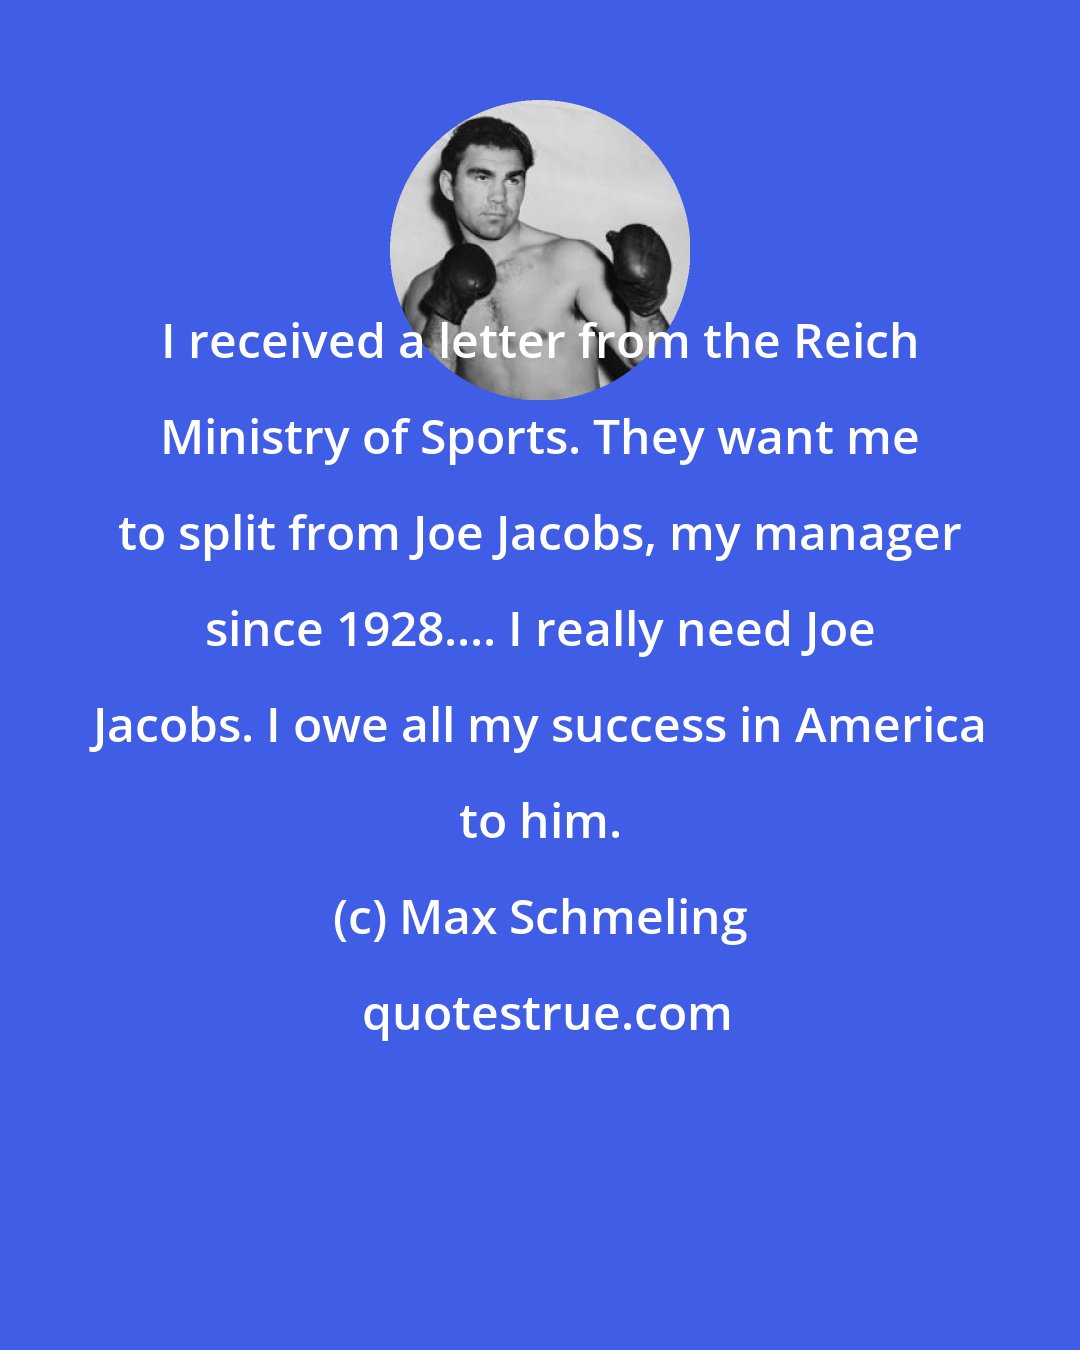 Max Schmeling: I received a letter from the Reich Ministry of Sports. They want me to split from Joe Jacobs, my manager since 1928.... I really need Joe Jacobs. I owe all my success in America to him.